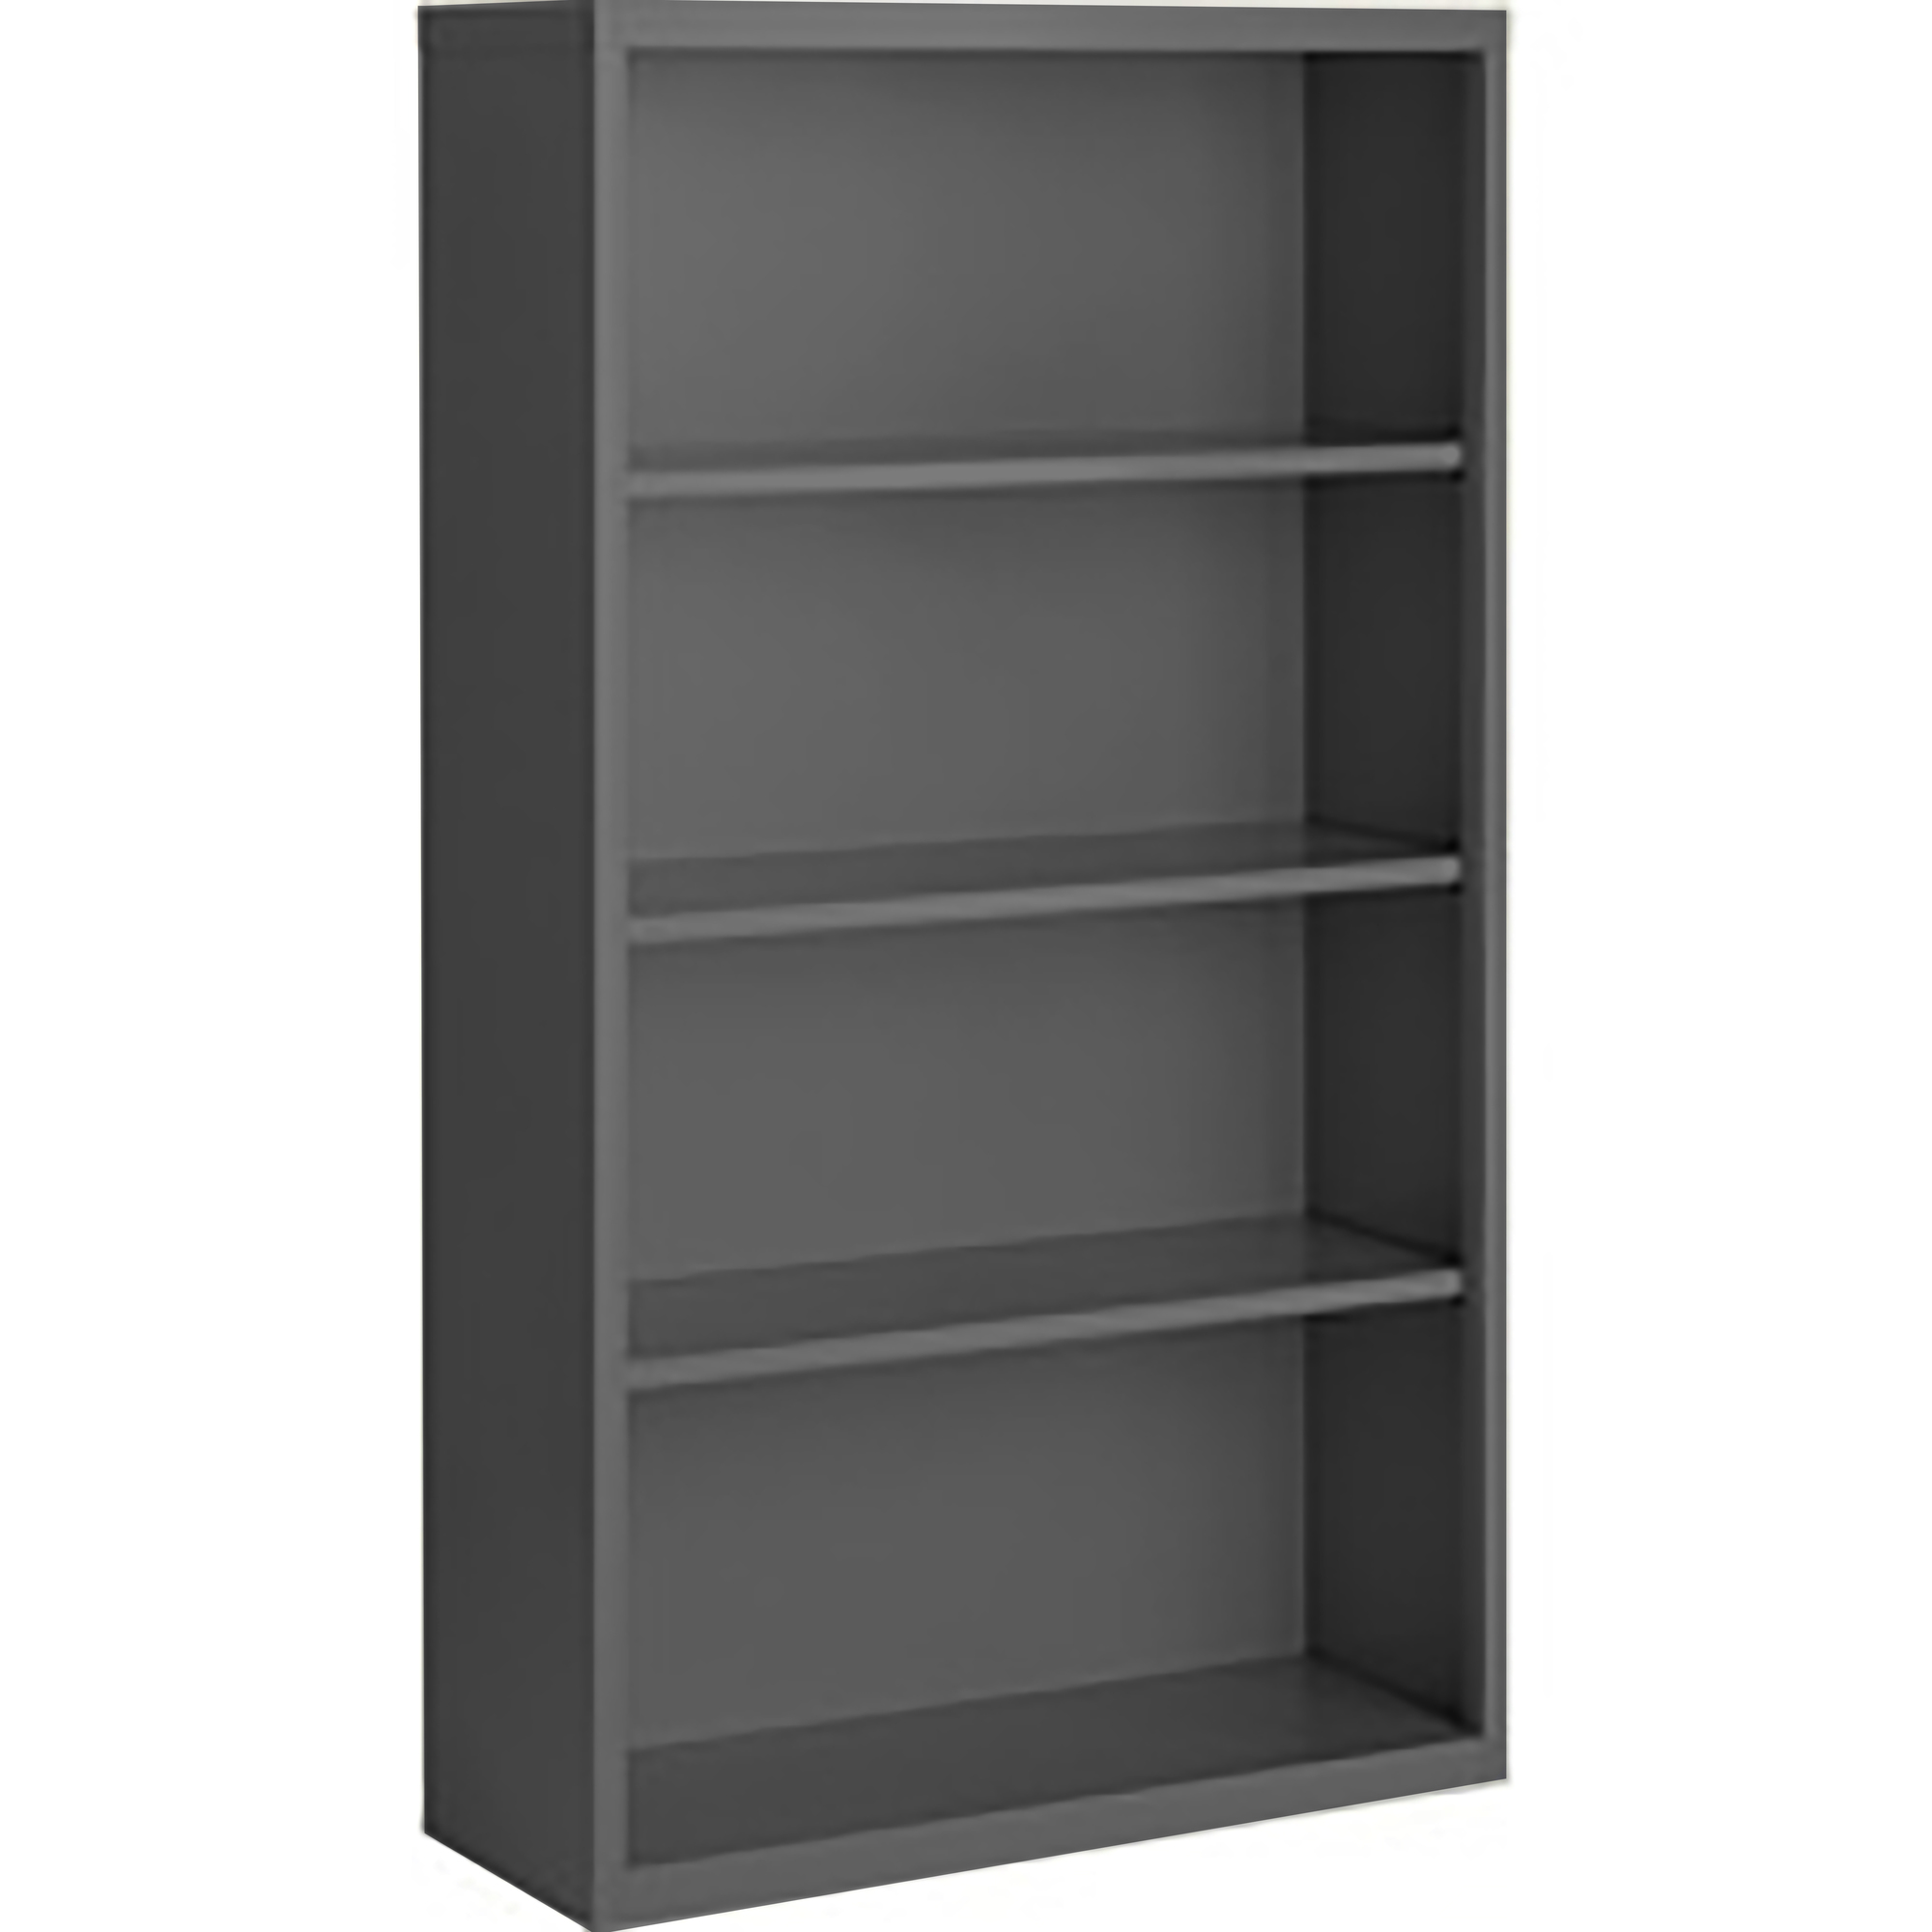 Steel Cabinets USA, 36Inchx13Inchx60Inch Charcoal Bookcase Steel Full Assembled, Height 60 in, Shelves (qty.) 4, Material Steel, Model BCA-366013-C